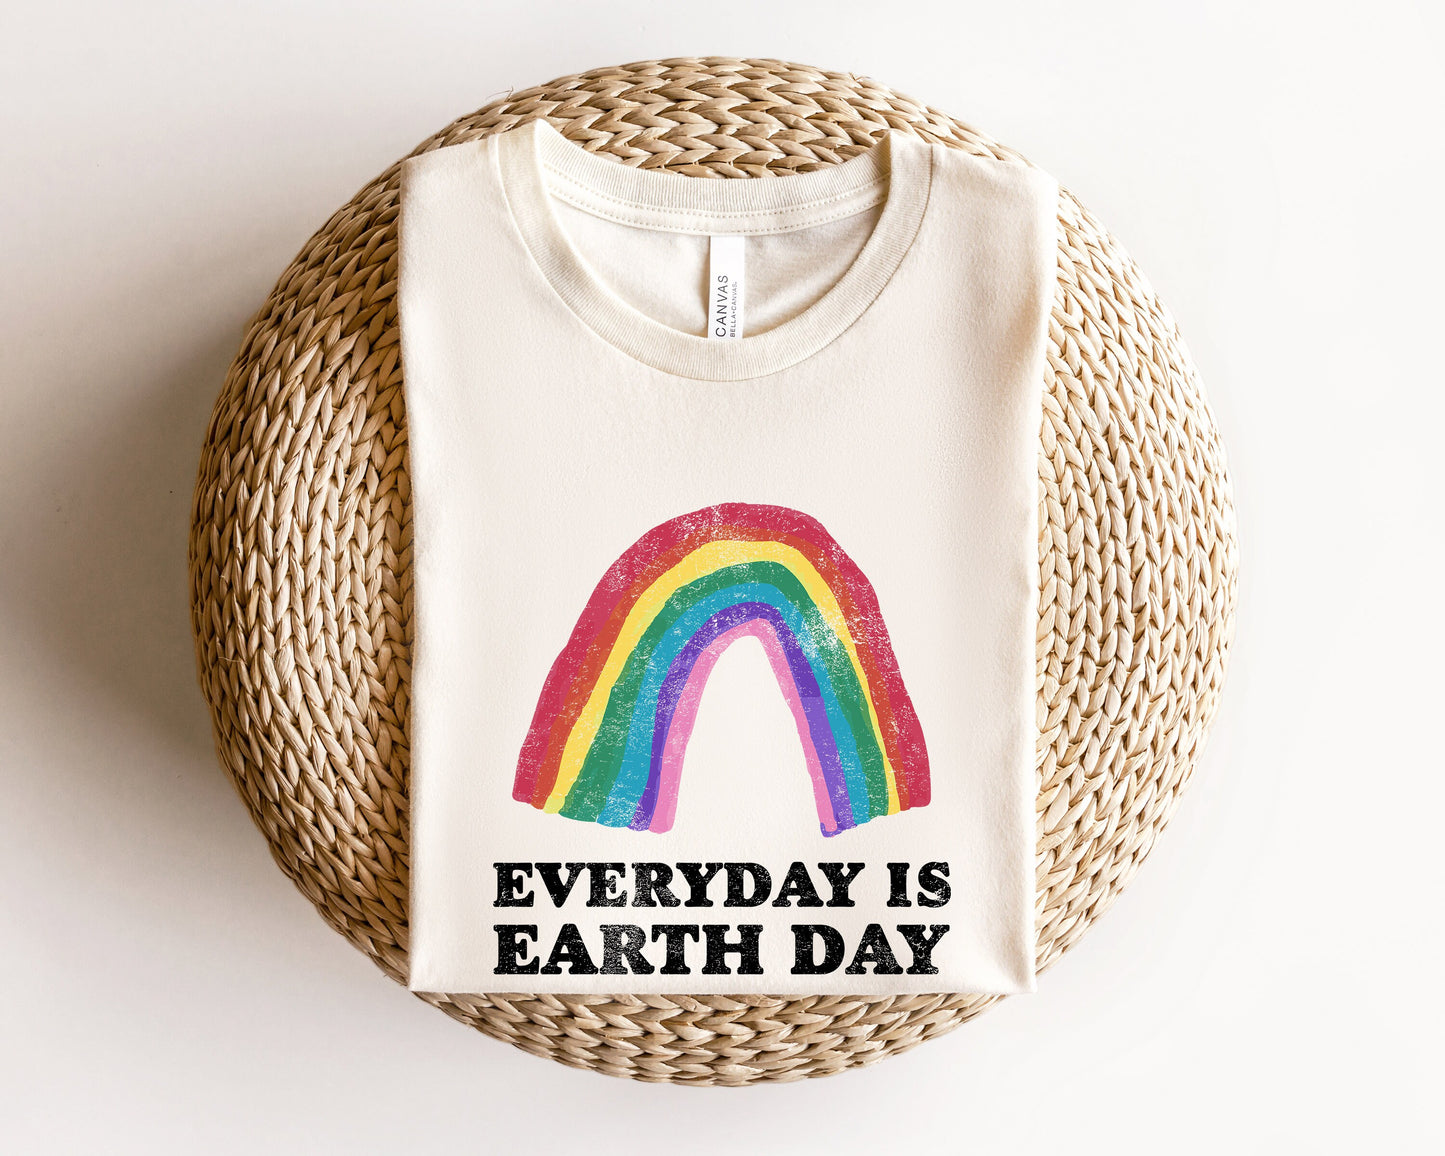 Every Day Is  Earth Day Rainbow Kids Drawing Retro Boho Hippie Style Ultra Soft Graphic Tee Unisex Soft Tee T-shirt for Women or Men